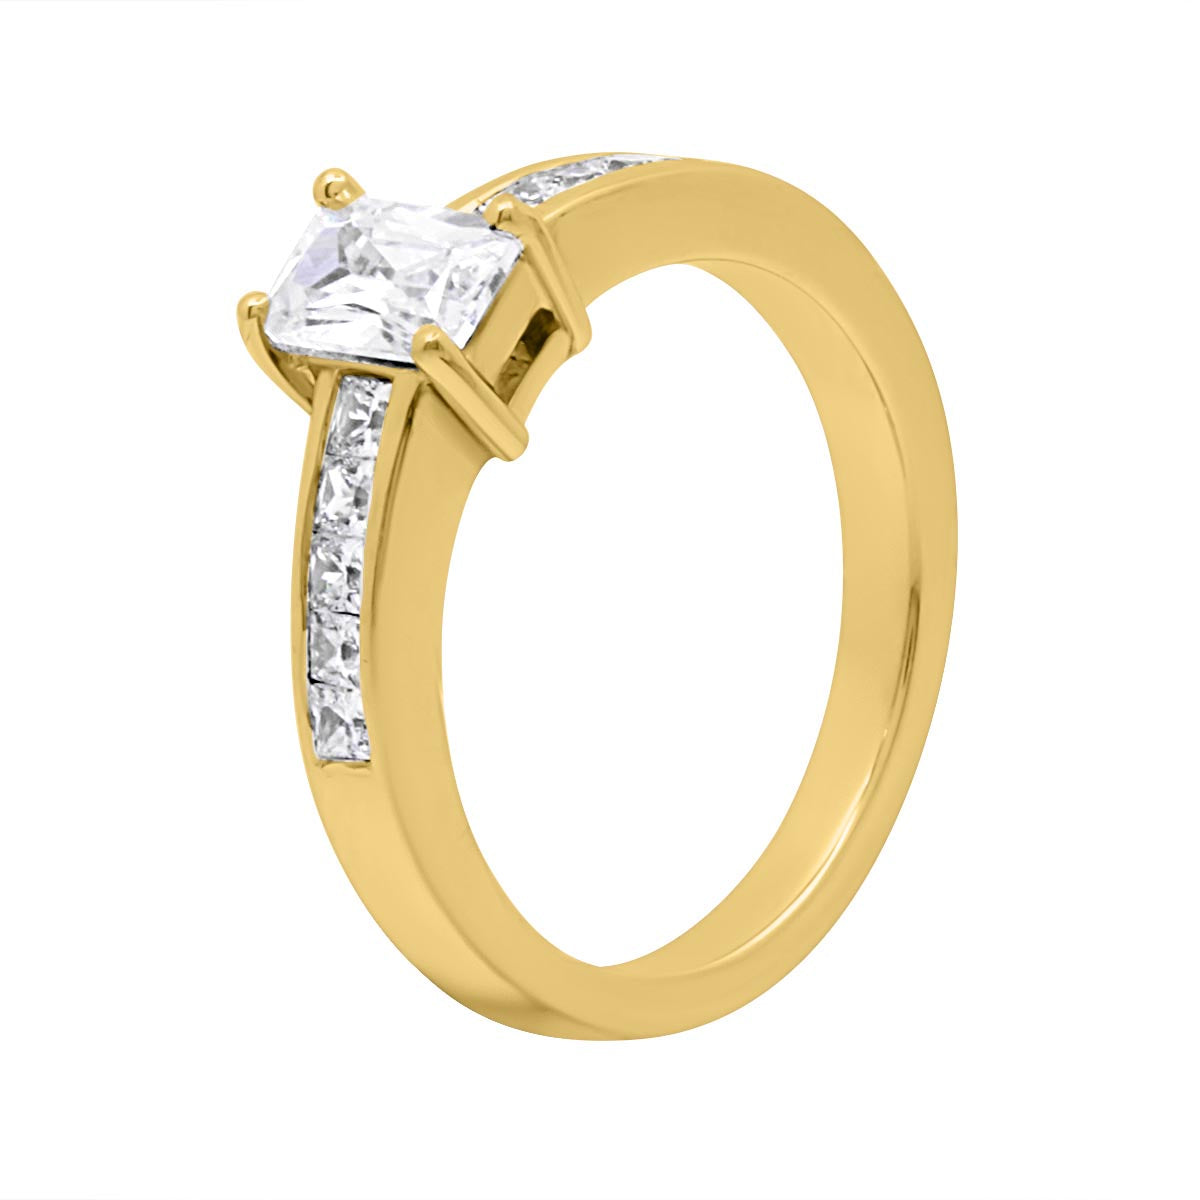 Radiant Cut Engagement Ring in yellow gold angled diagonal 